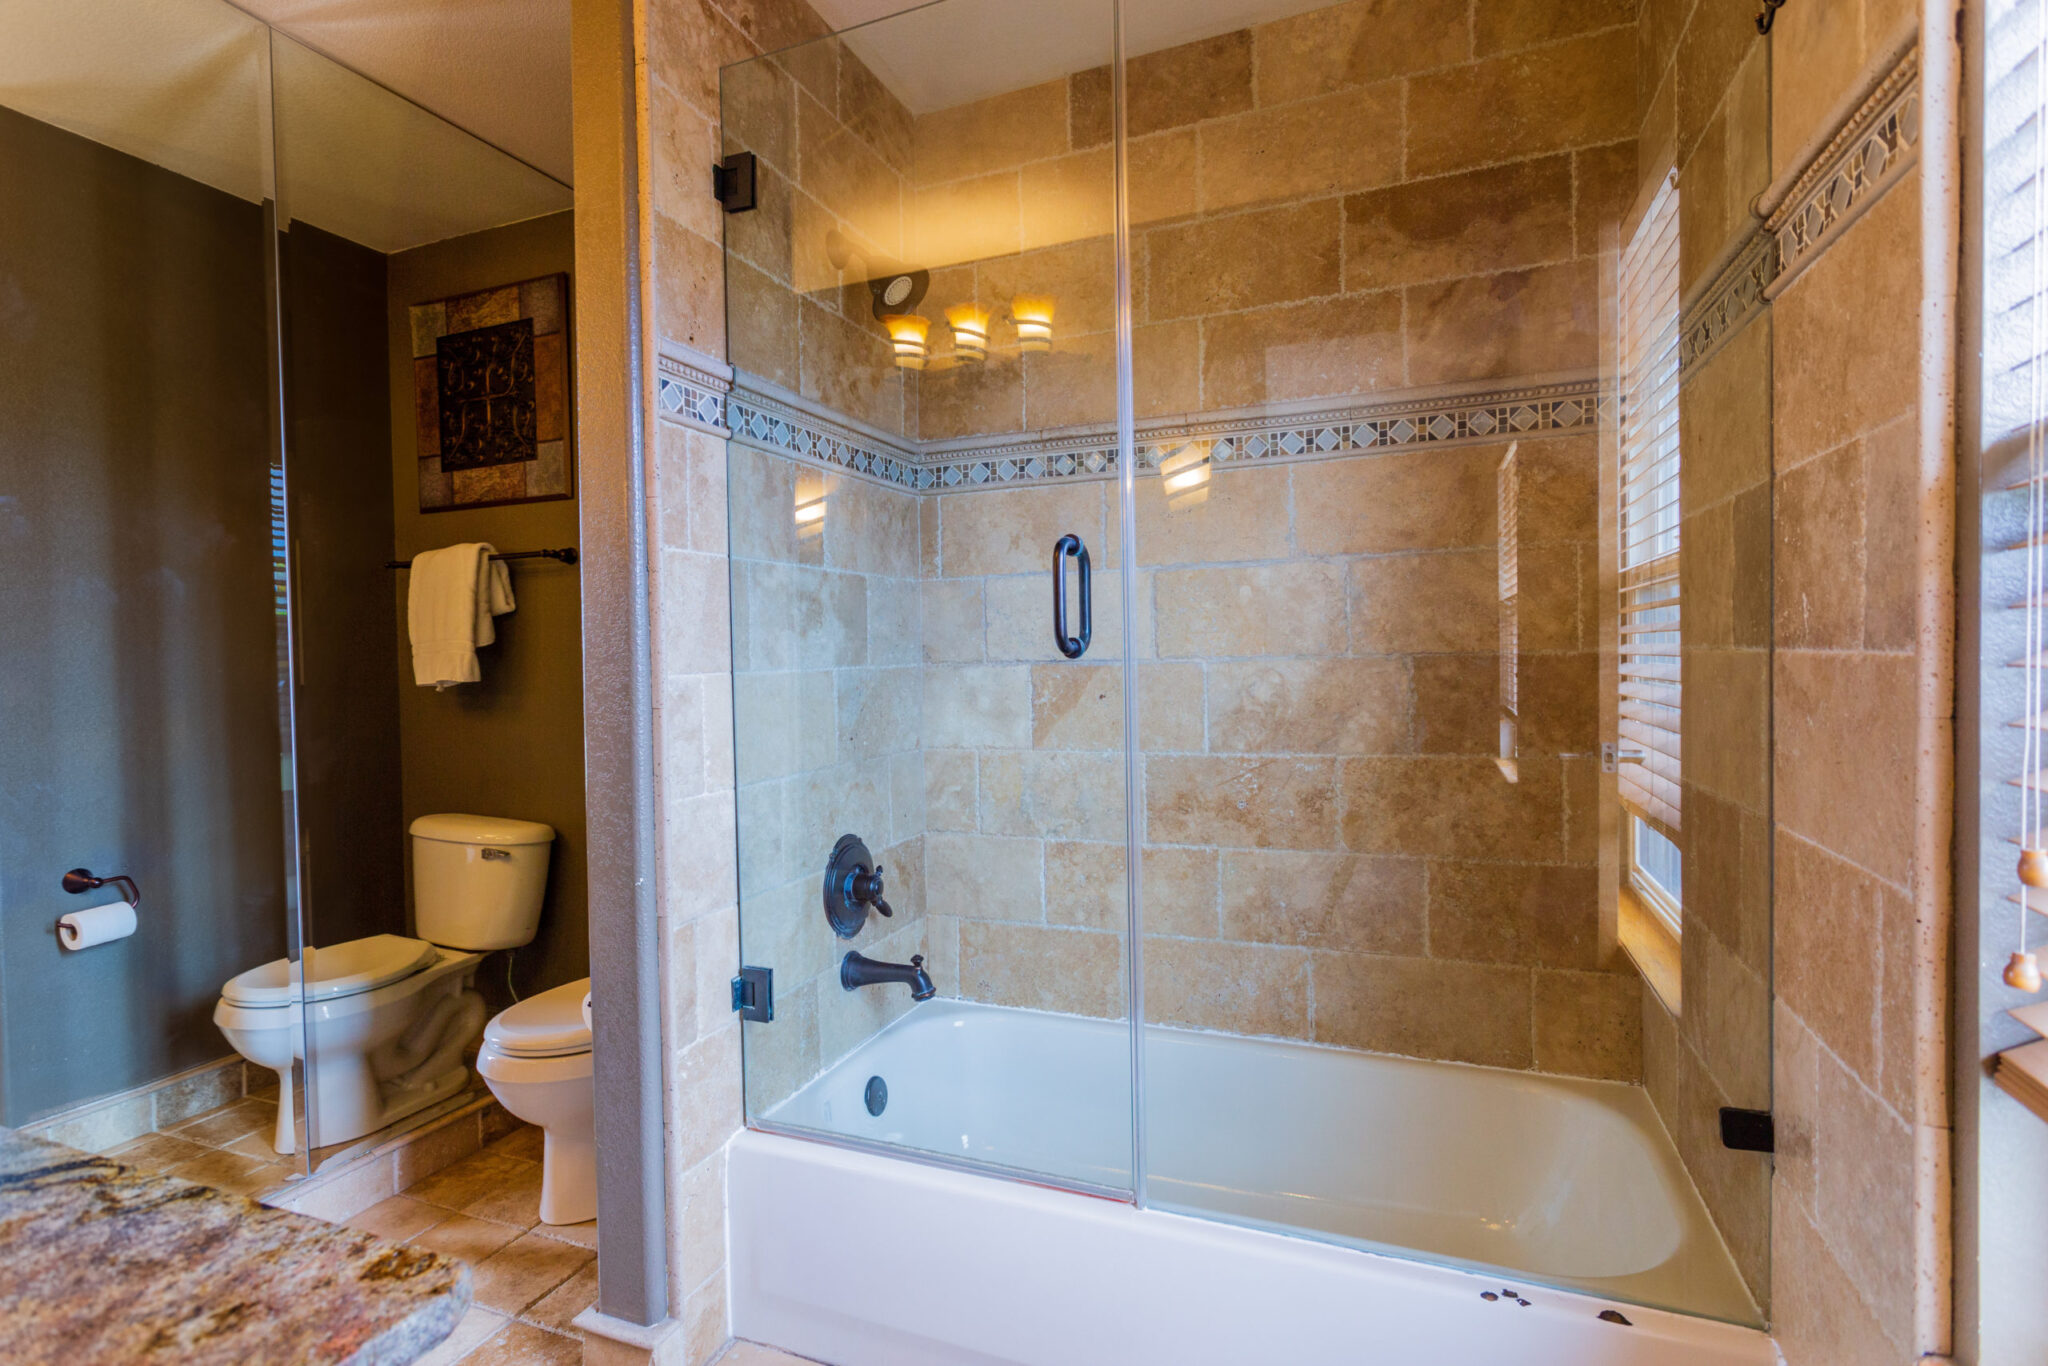 New This Week: 5 Beautiful Bathrooms With a Shower-Tub Combo